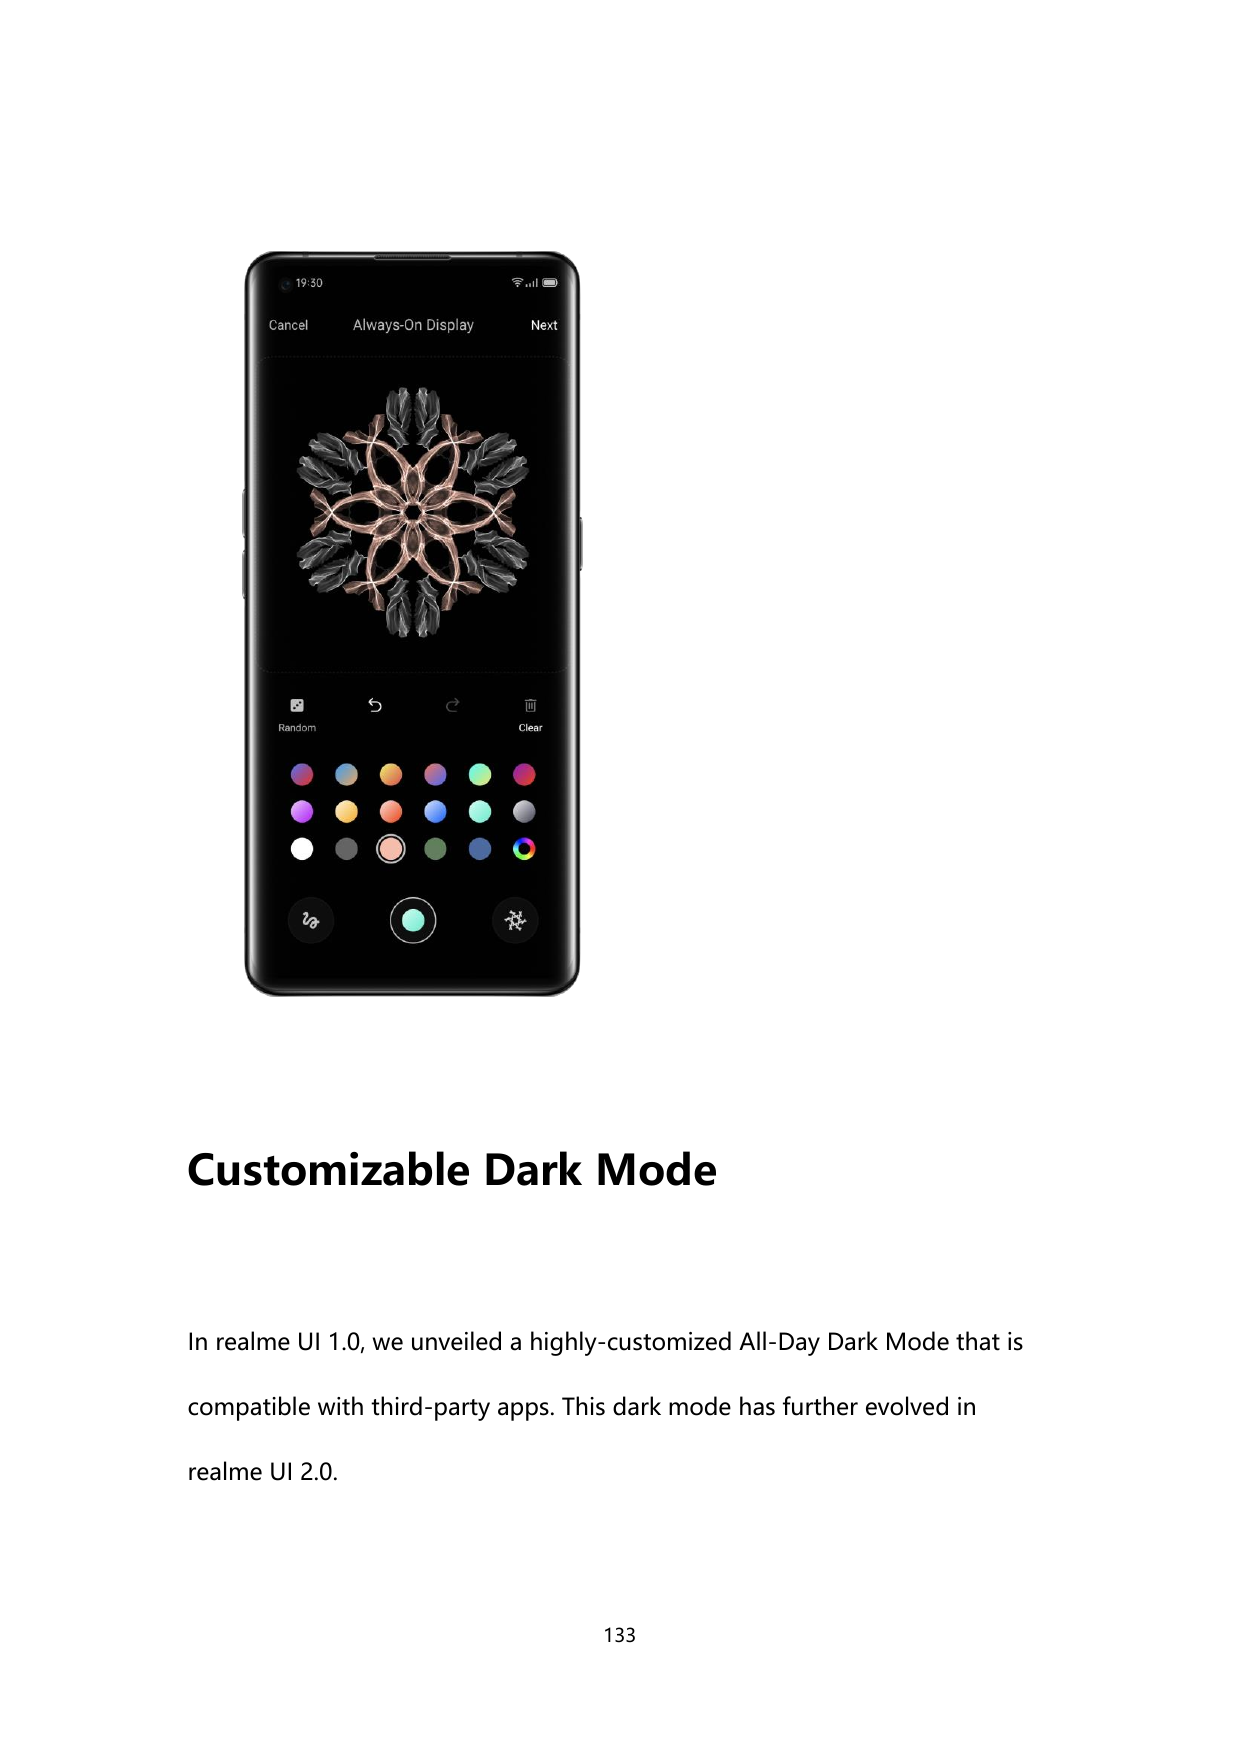 Customizable Dark ModeIn realme UI 1.0, we unveiled a highly-customized All-Day Dark Mode that iscompatible with third-party app